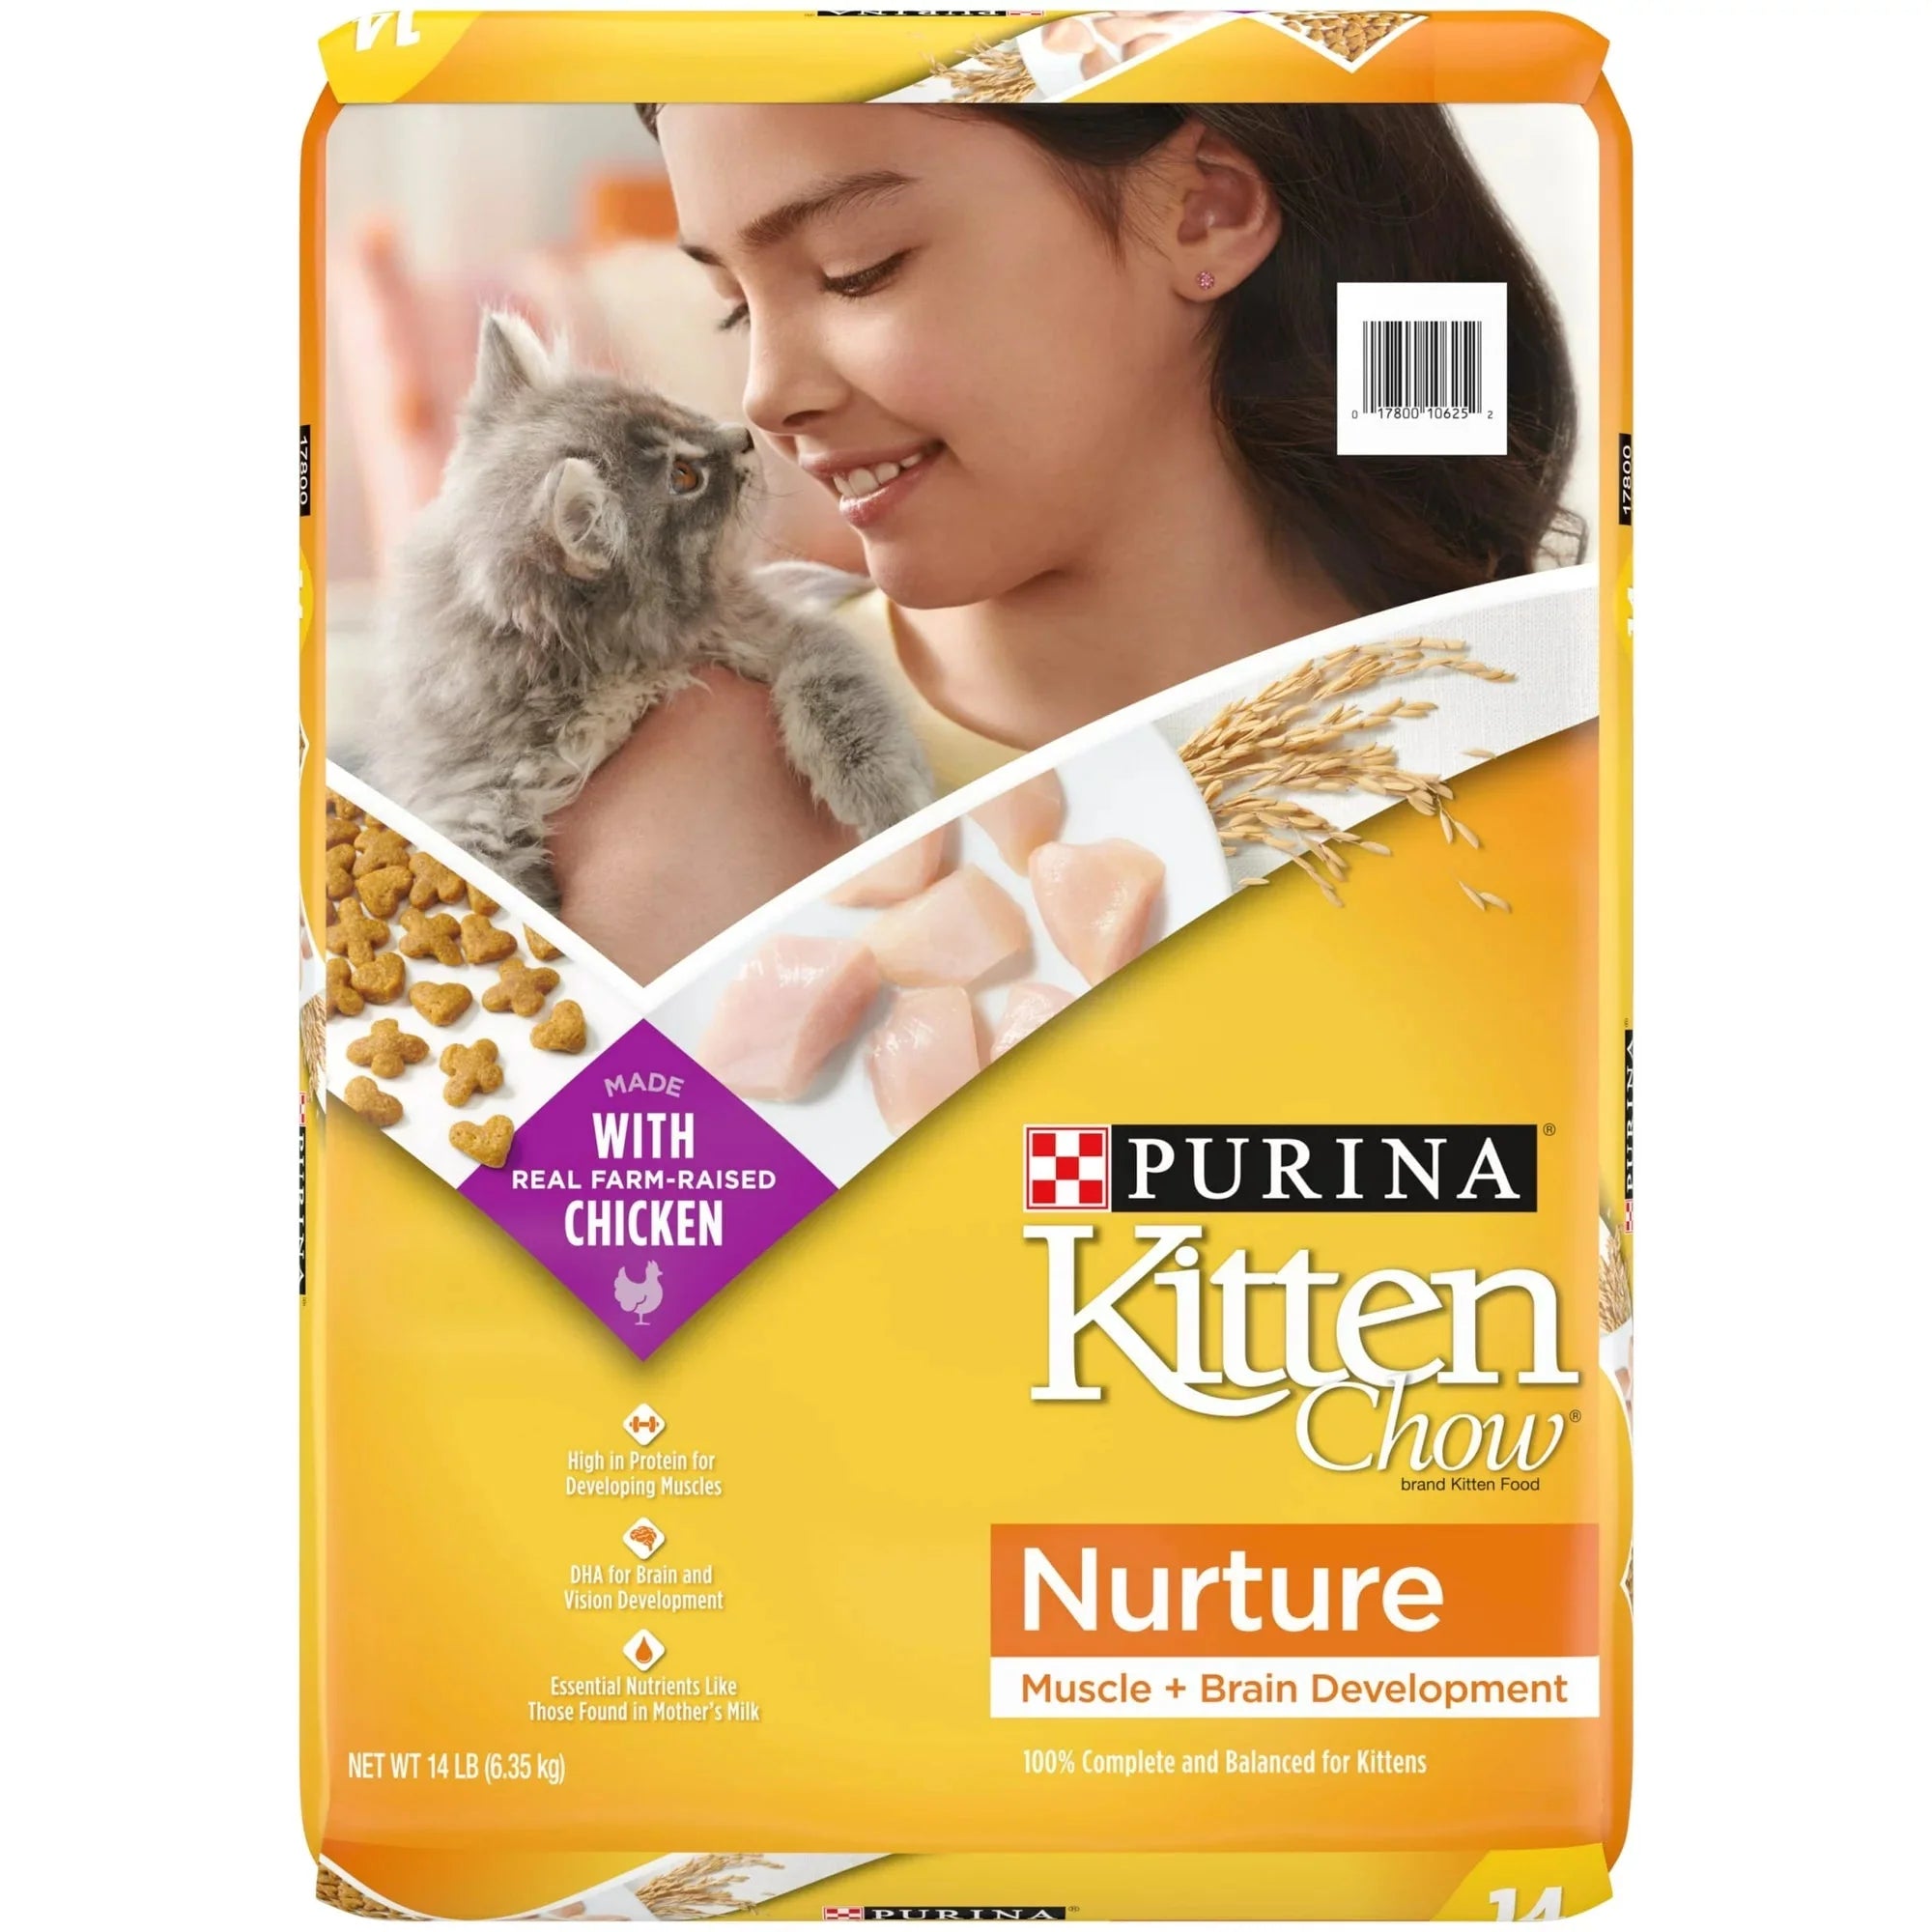 Wholesale prices with free shipping all over United States Purina Kitten Chow Nurture Dry Cat Food Muscle & Brain Development, High Protein Farm Raised Chicken, 14 lb Bag - Steven Deals